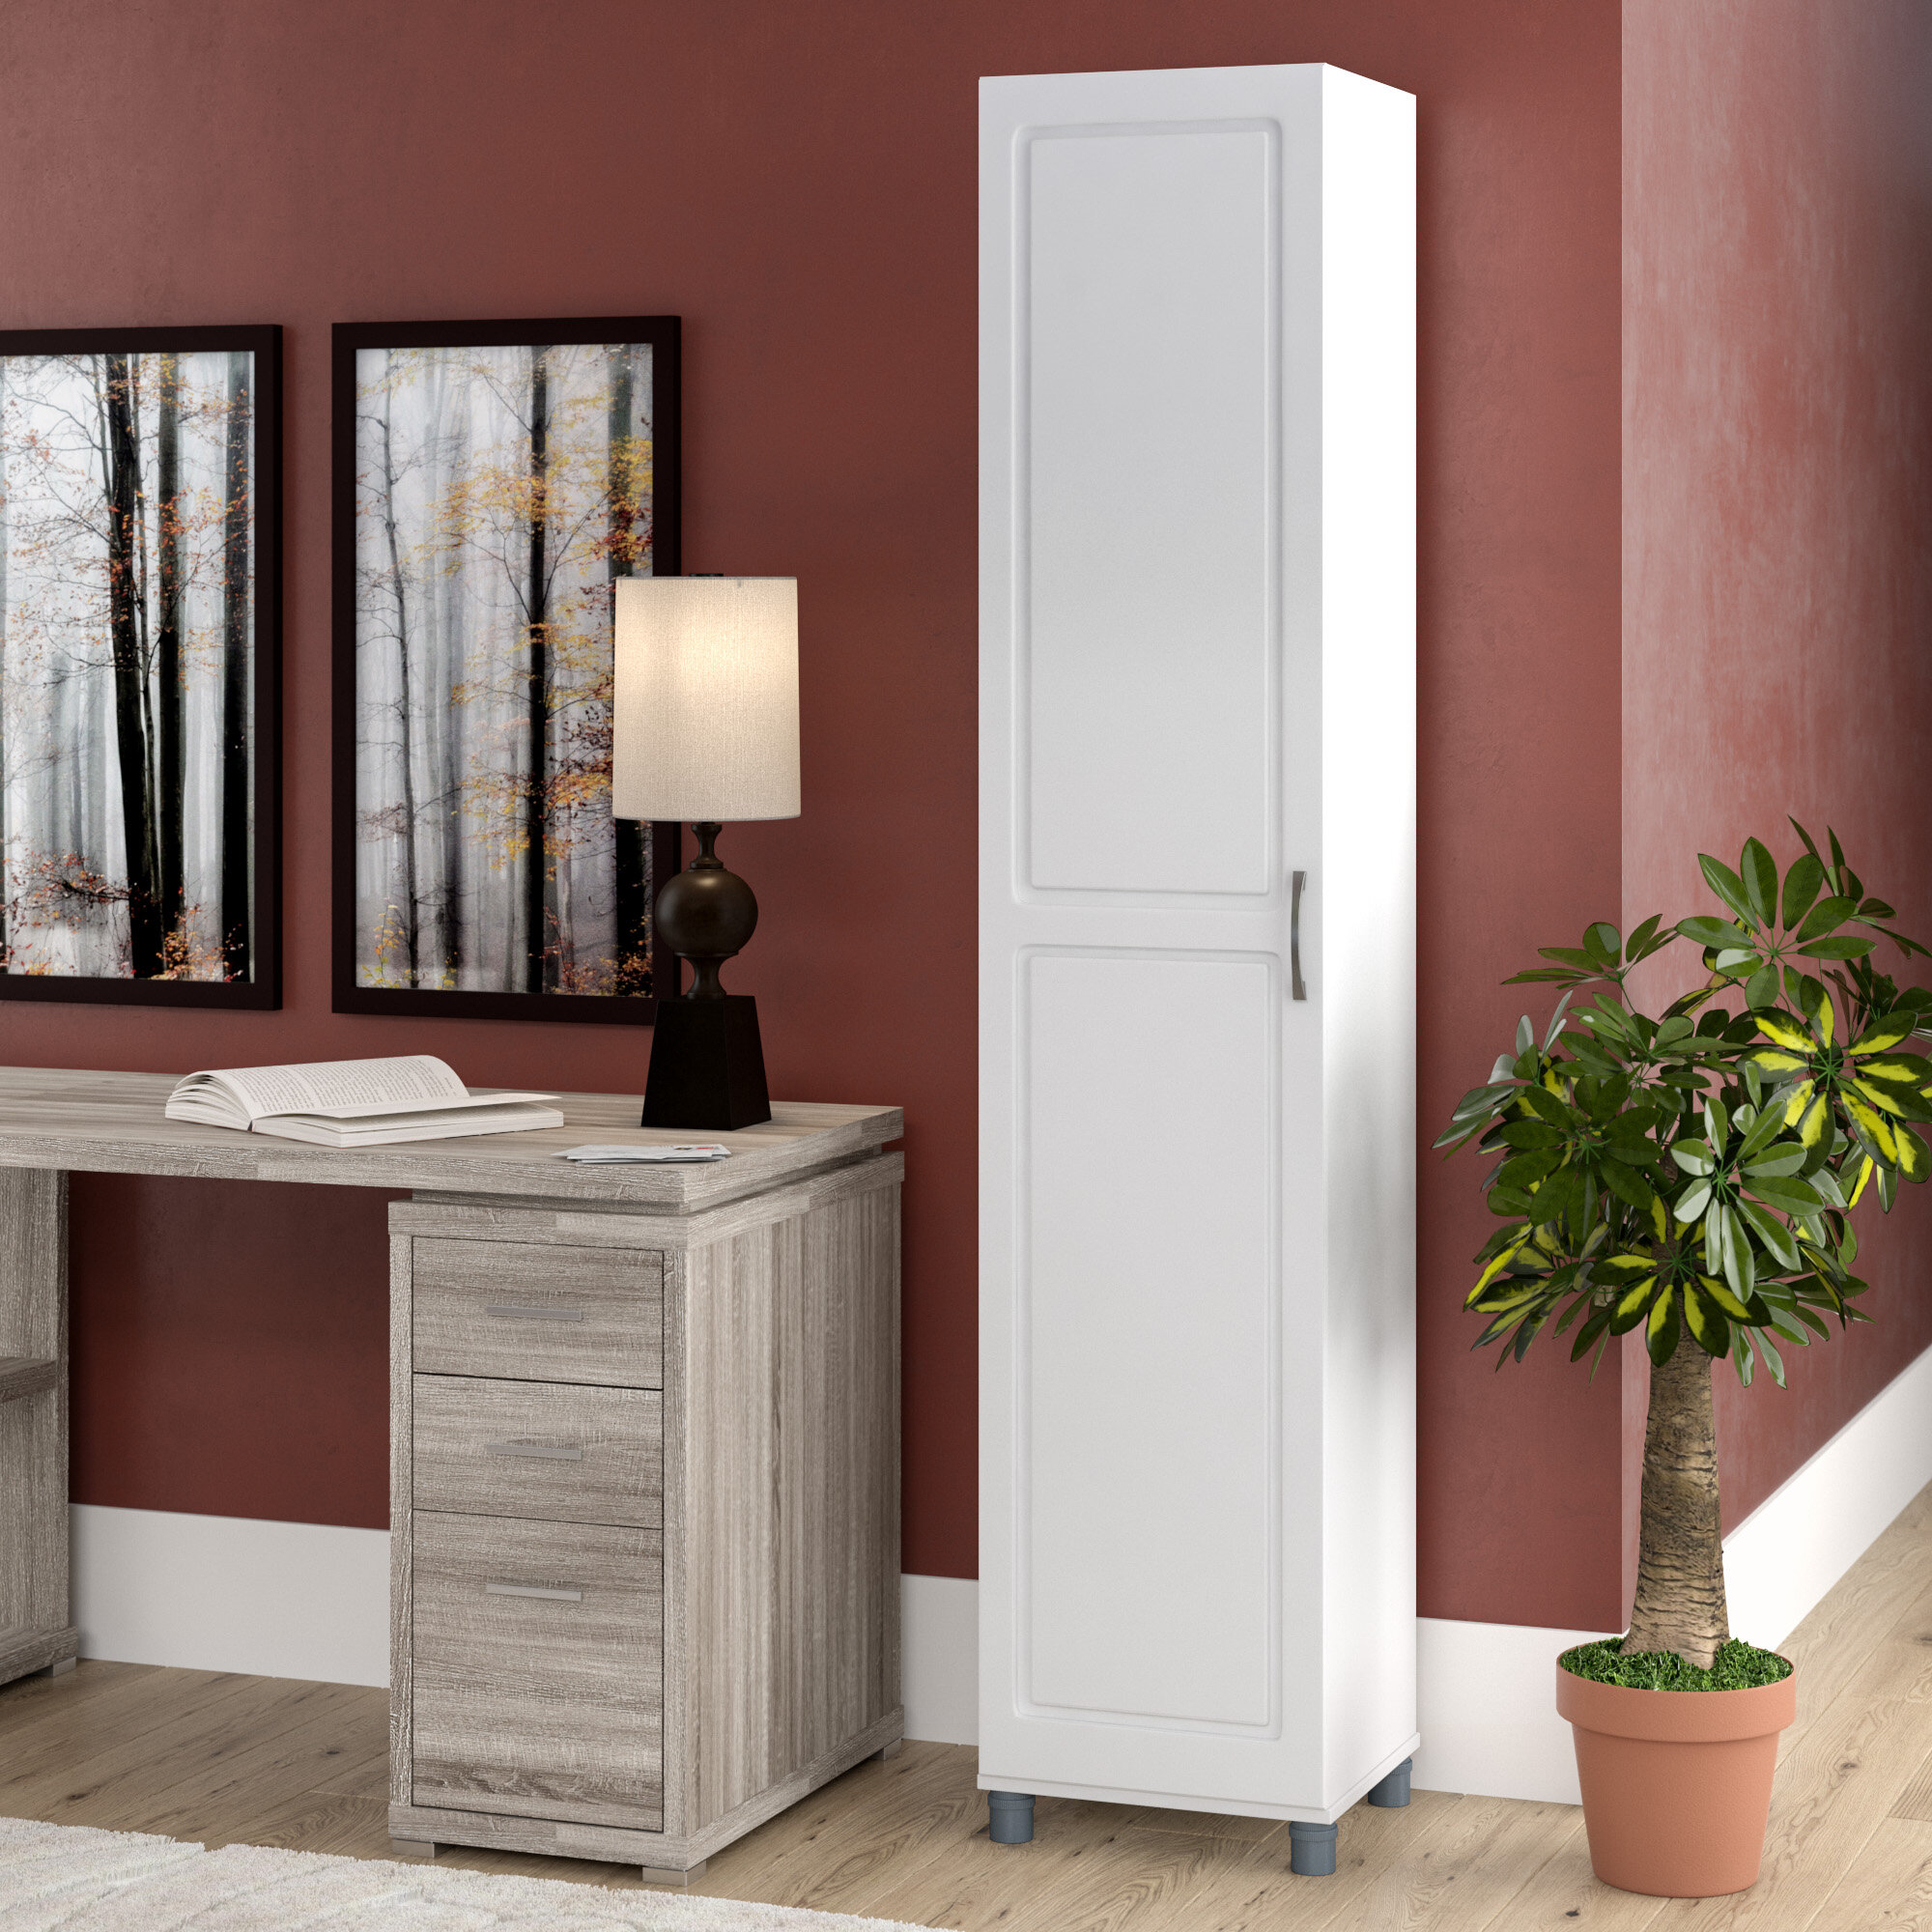 Tall Wood Storage Cabinets With Doors, Long Narrow Cabinet With Doors